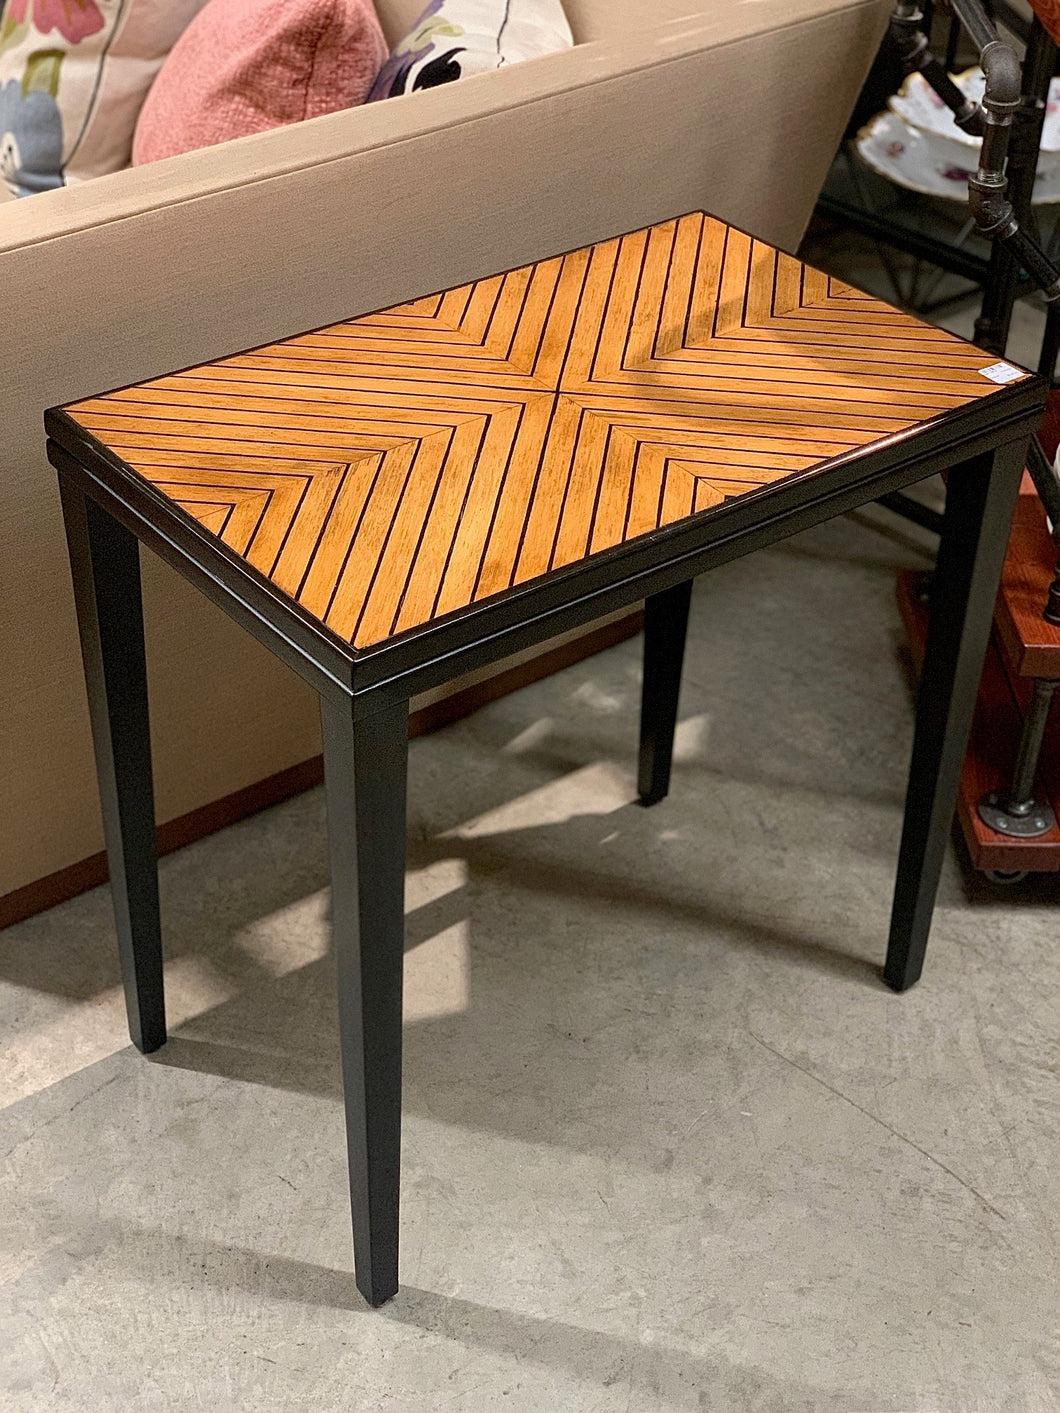 Groovy Inlay side table